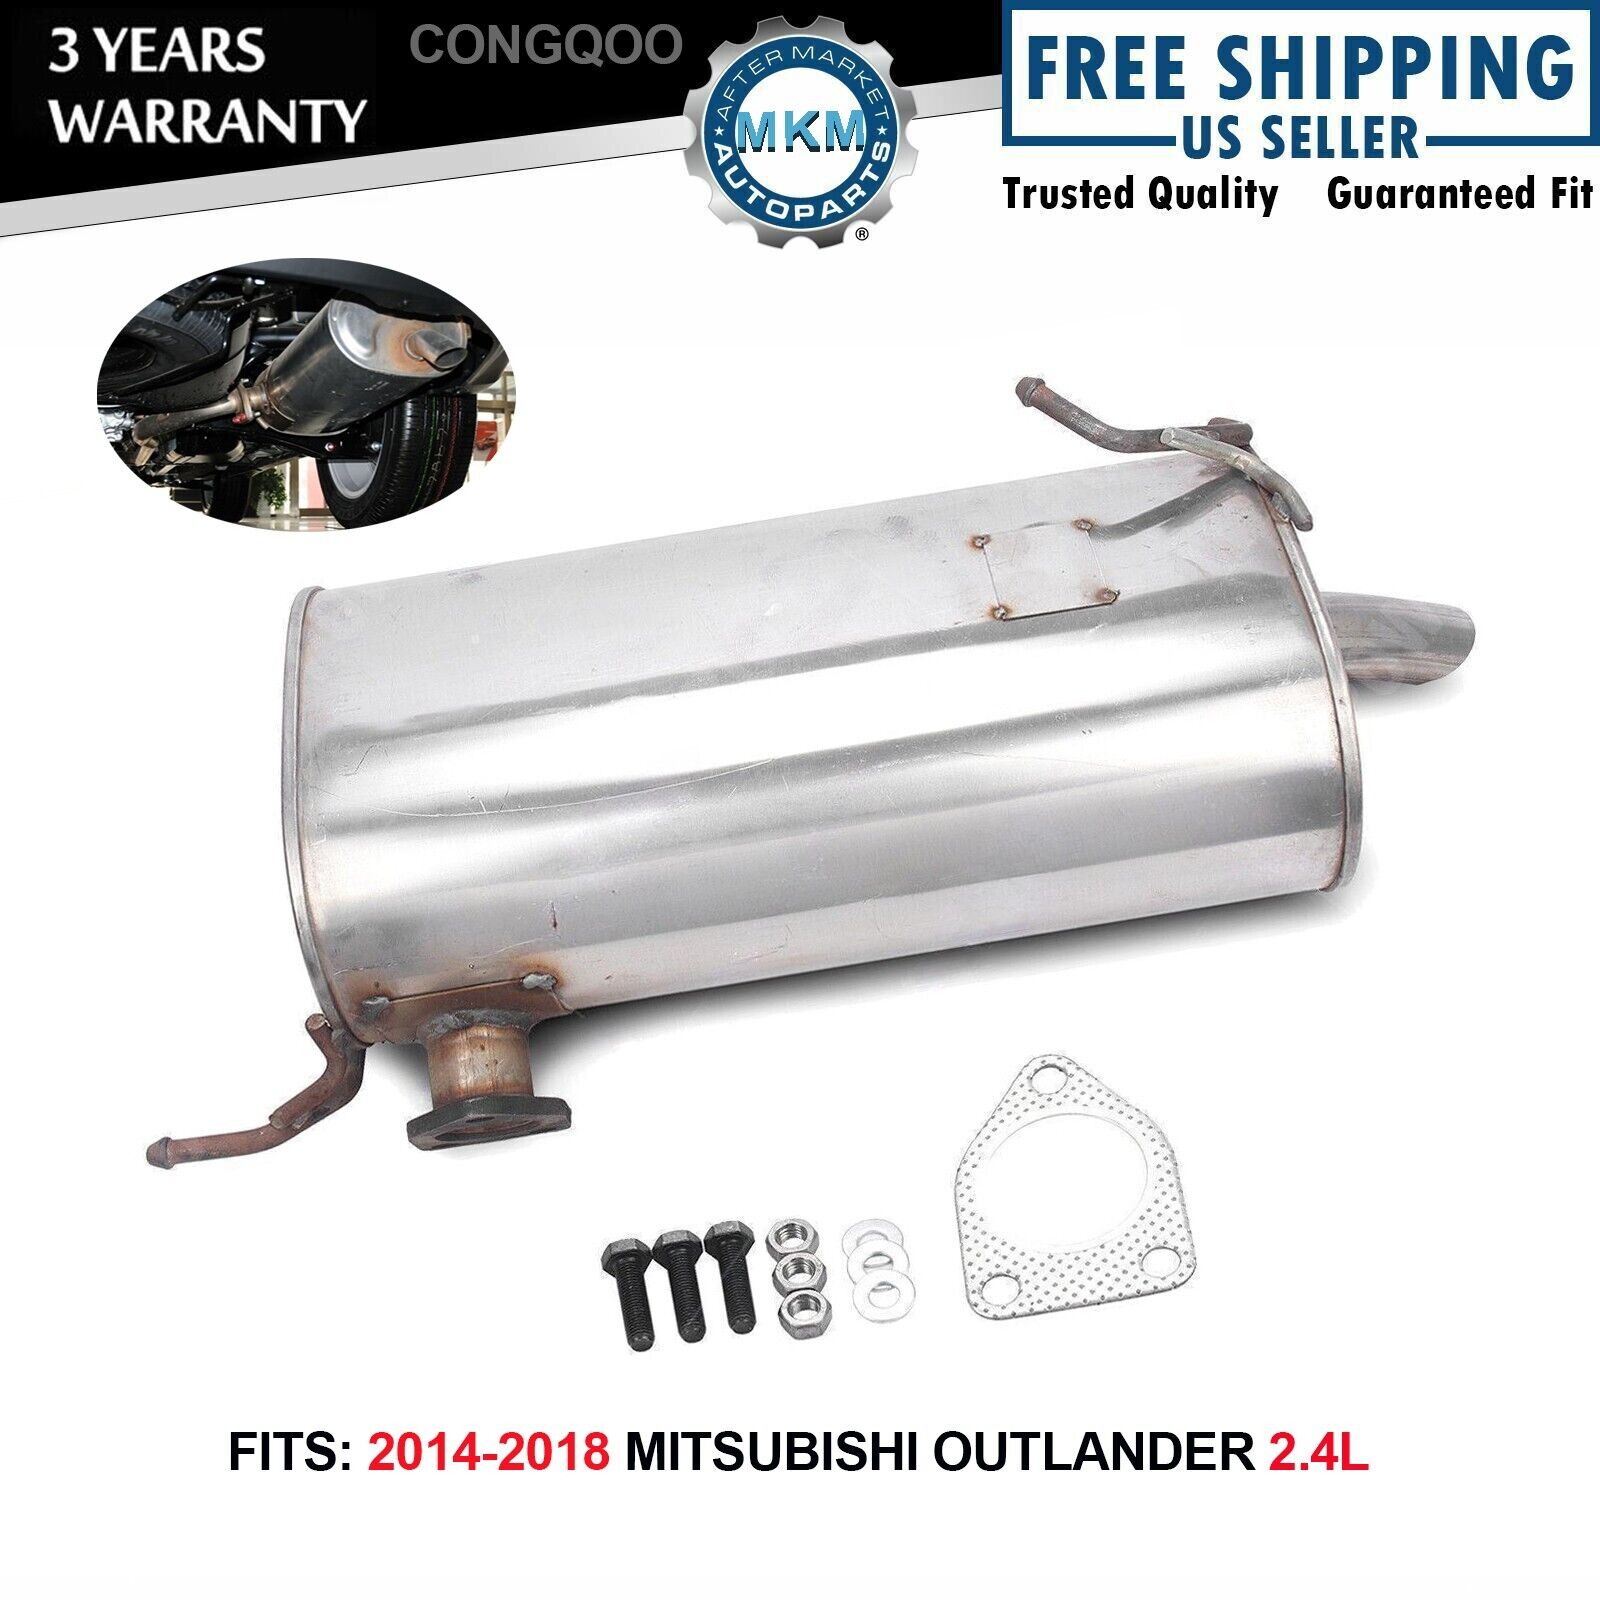 Fits 2014 To 2018 Mitsubishi Outlander 2.4L Muffler (with Single Tail) New US